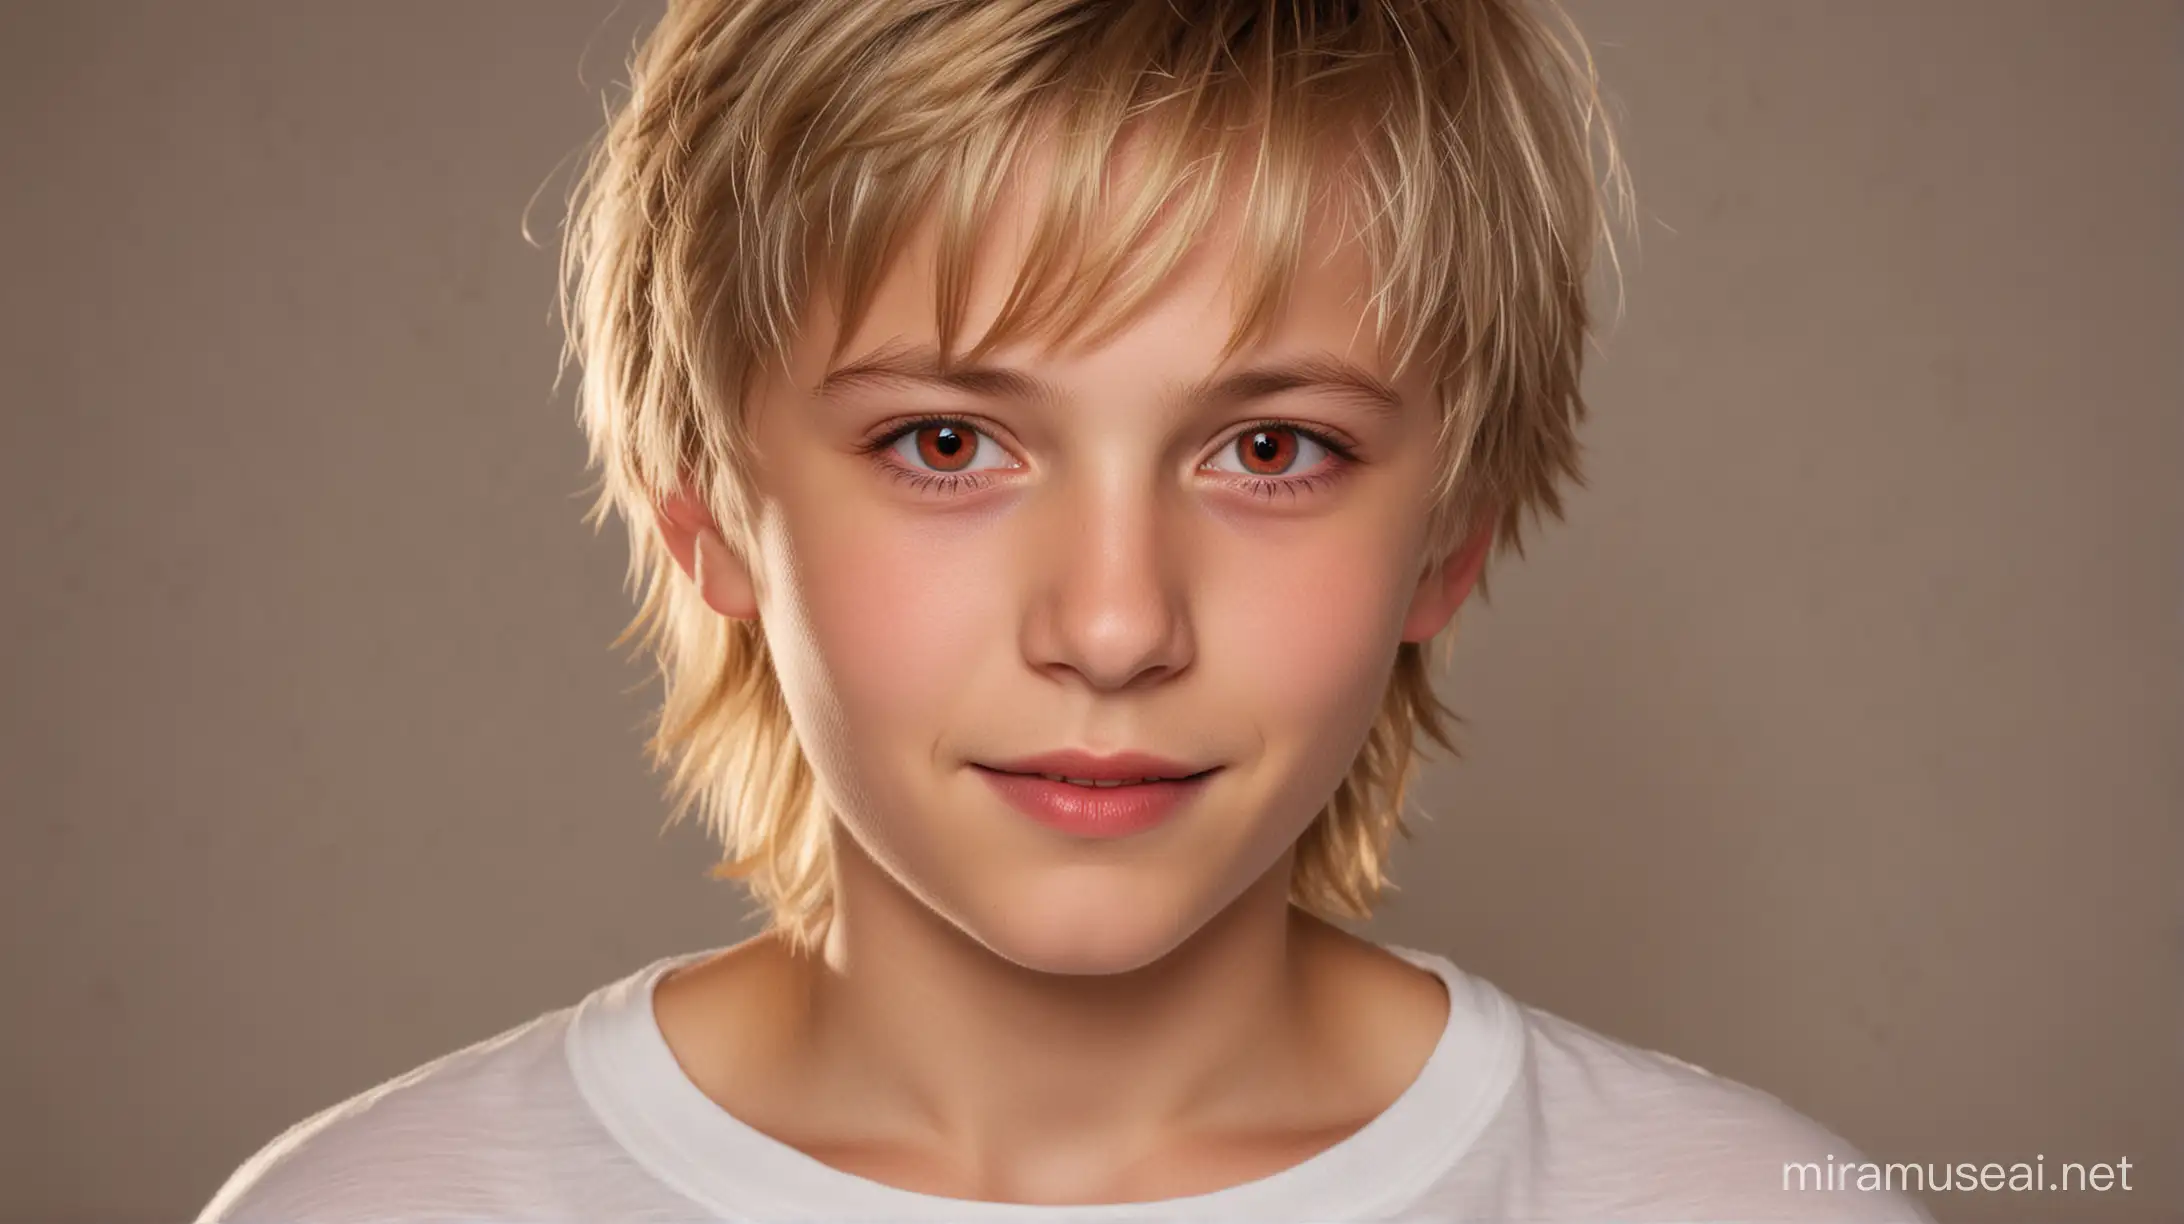 Adorable 13YearOld Blond Boy with Red Glowing Eyes